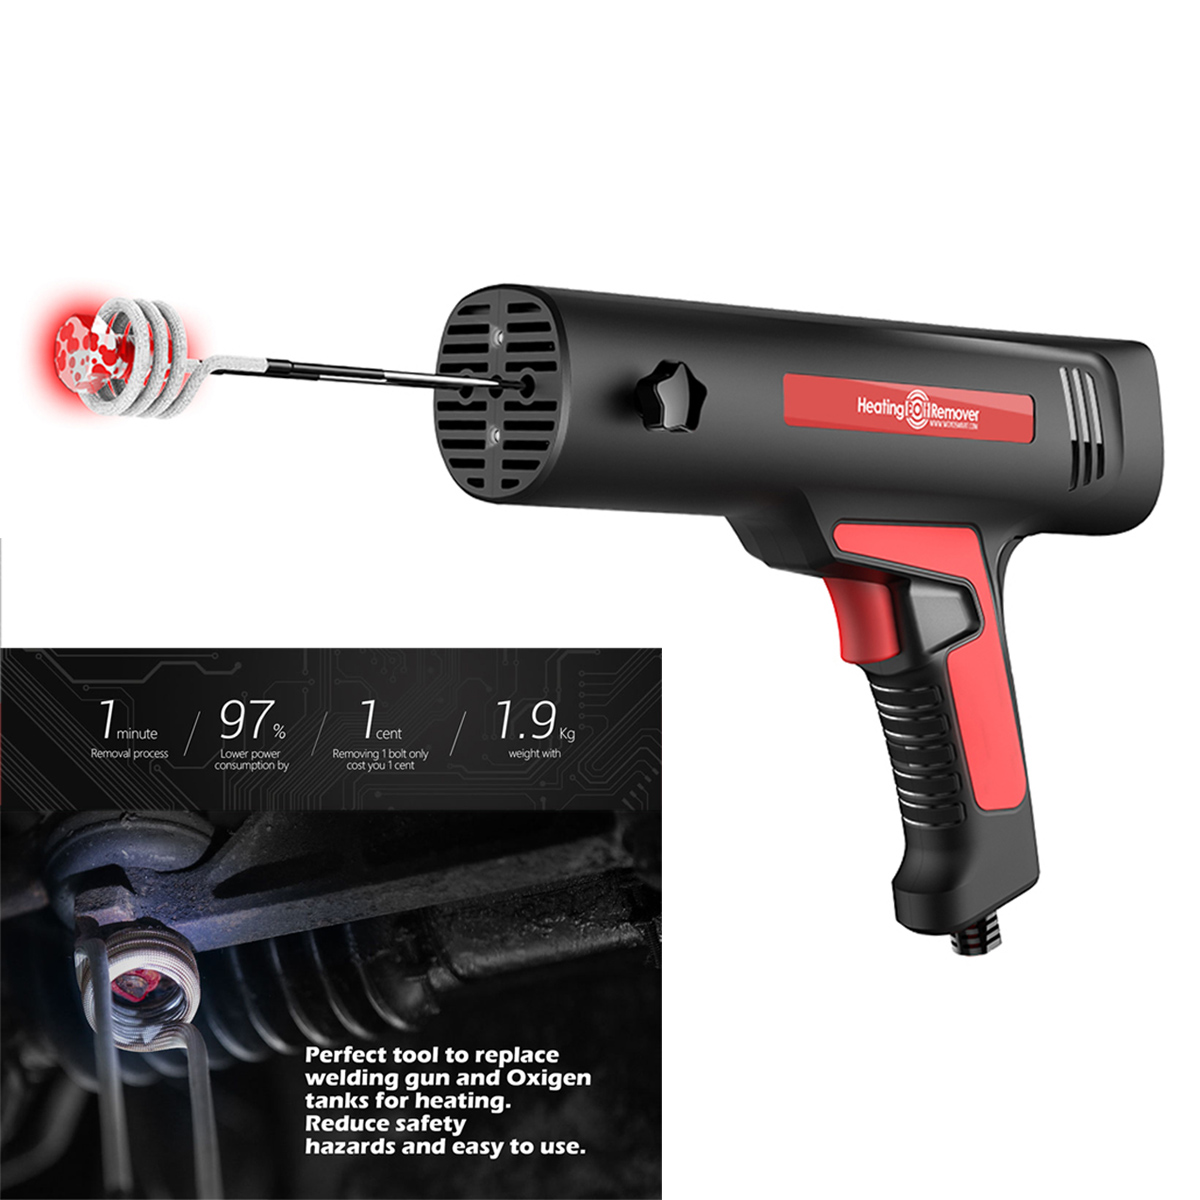 WOYO-900W-Rusty-Nut-Screw-Remover-Ductor-Magnetic-Induction-Heater-Kit-Automotive-Flameless-Heat-1336959-6